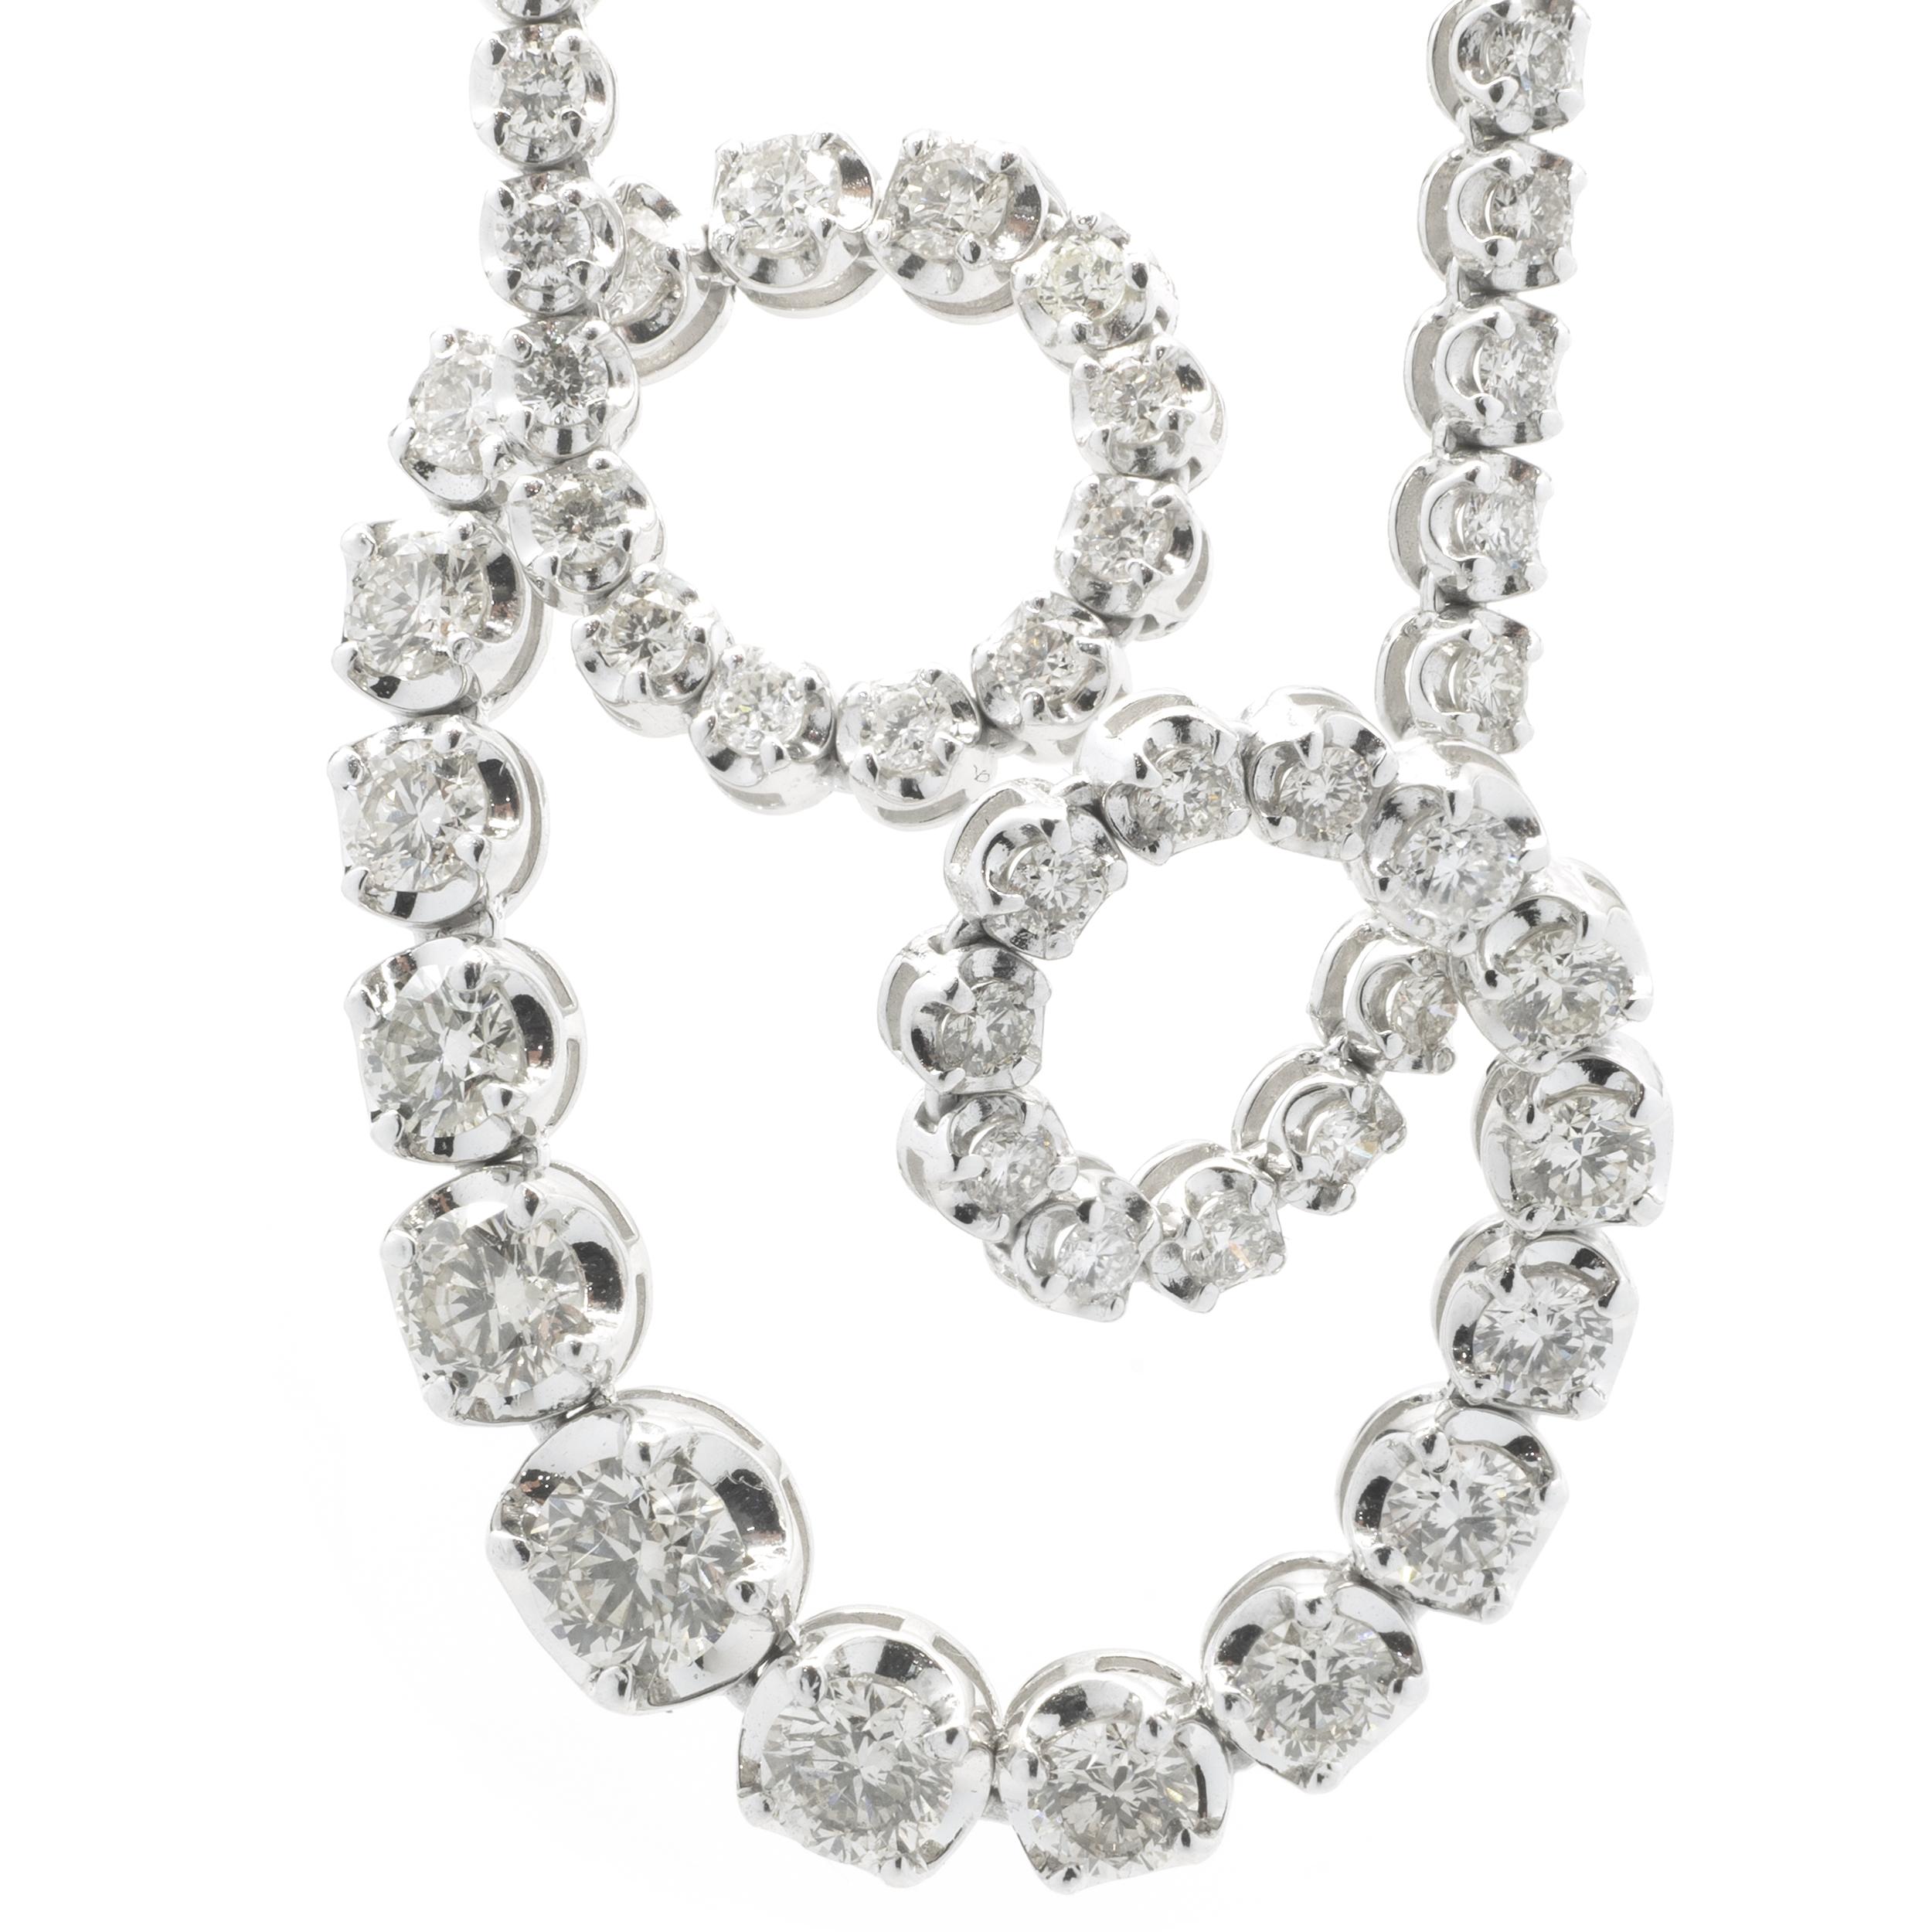 Designer: custom design
Material: 14K white gold 
Diamond: 126 round brilliant cut = 6.05cttw
Color: G / H
Clarity: SI1-2
Dimensions: necklace measures 16.5-inches in length
Weight: 14.71 grams
